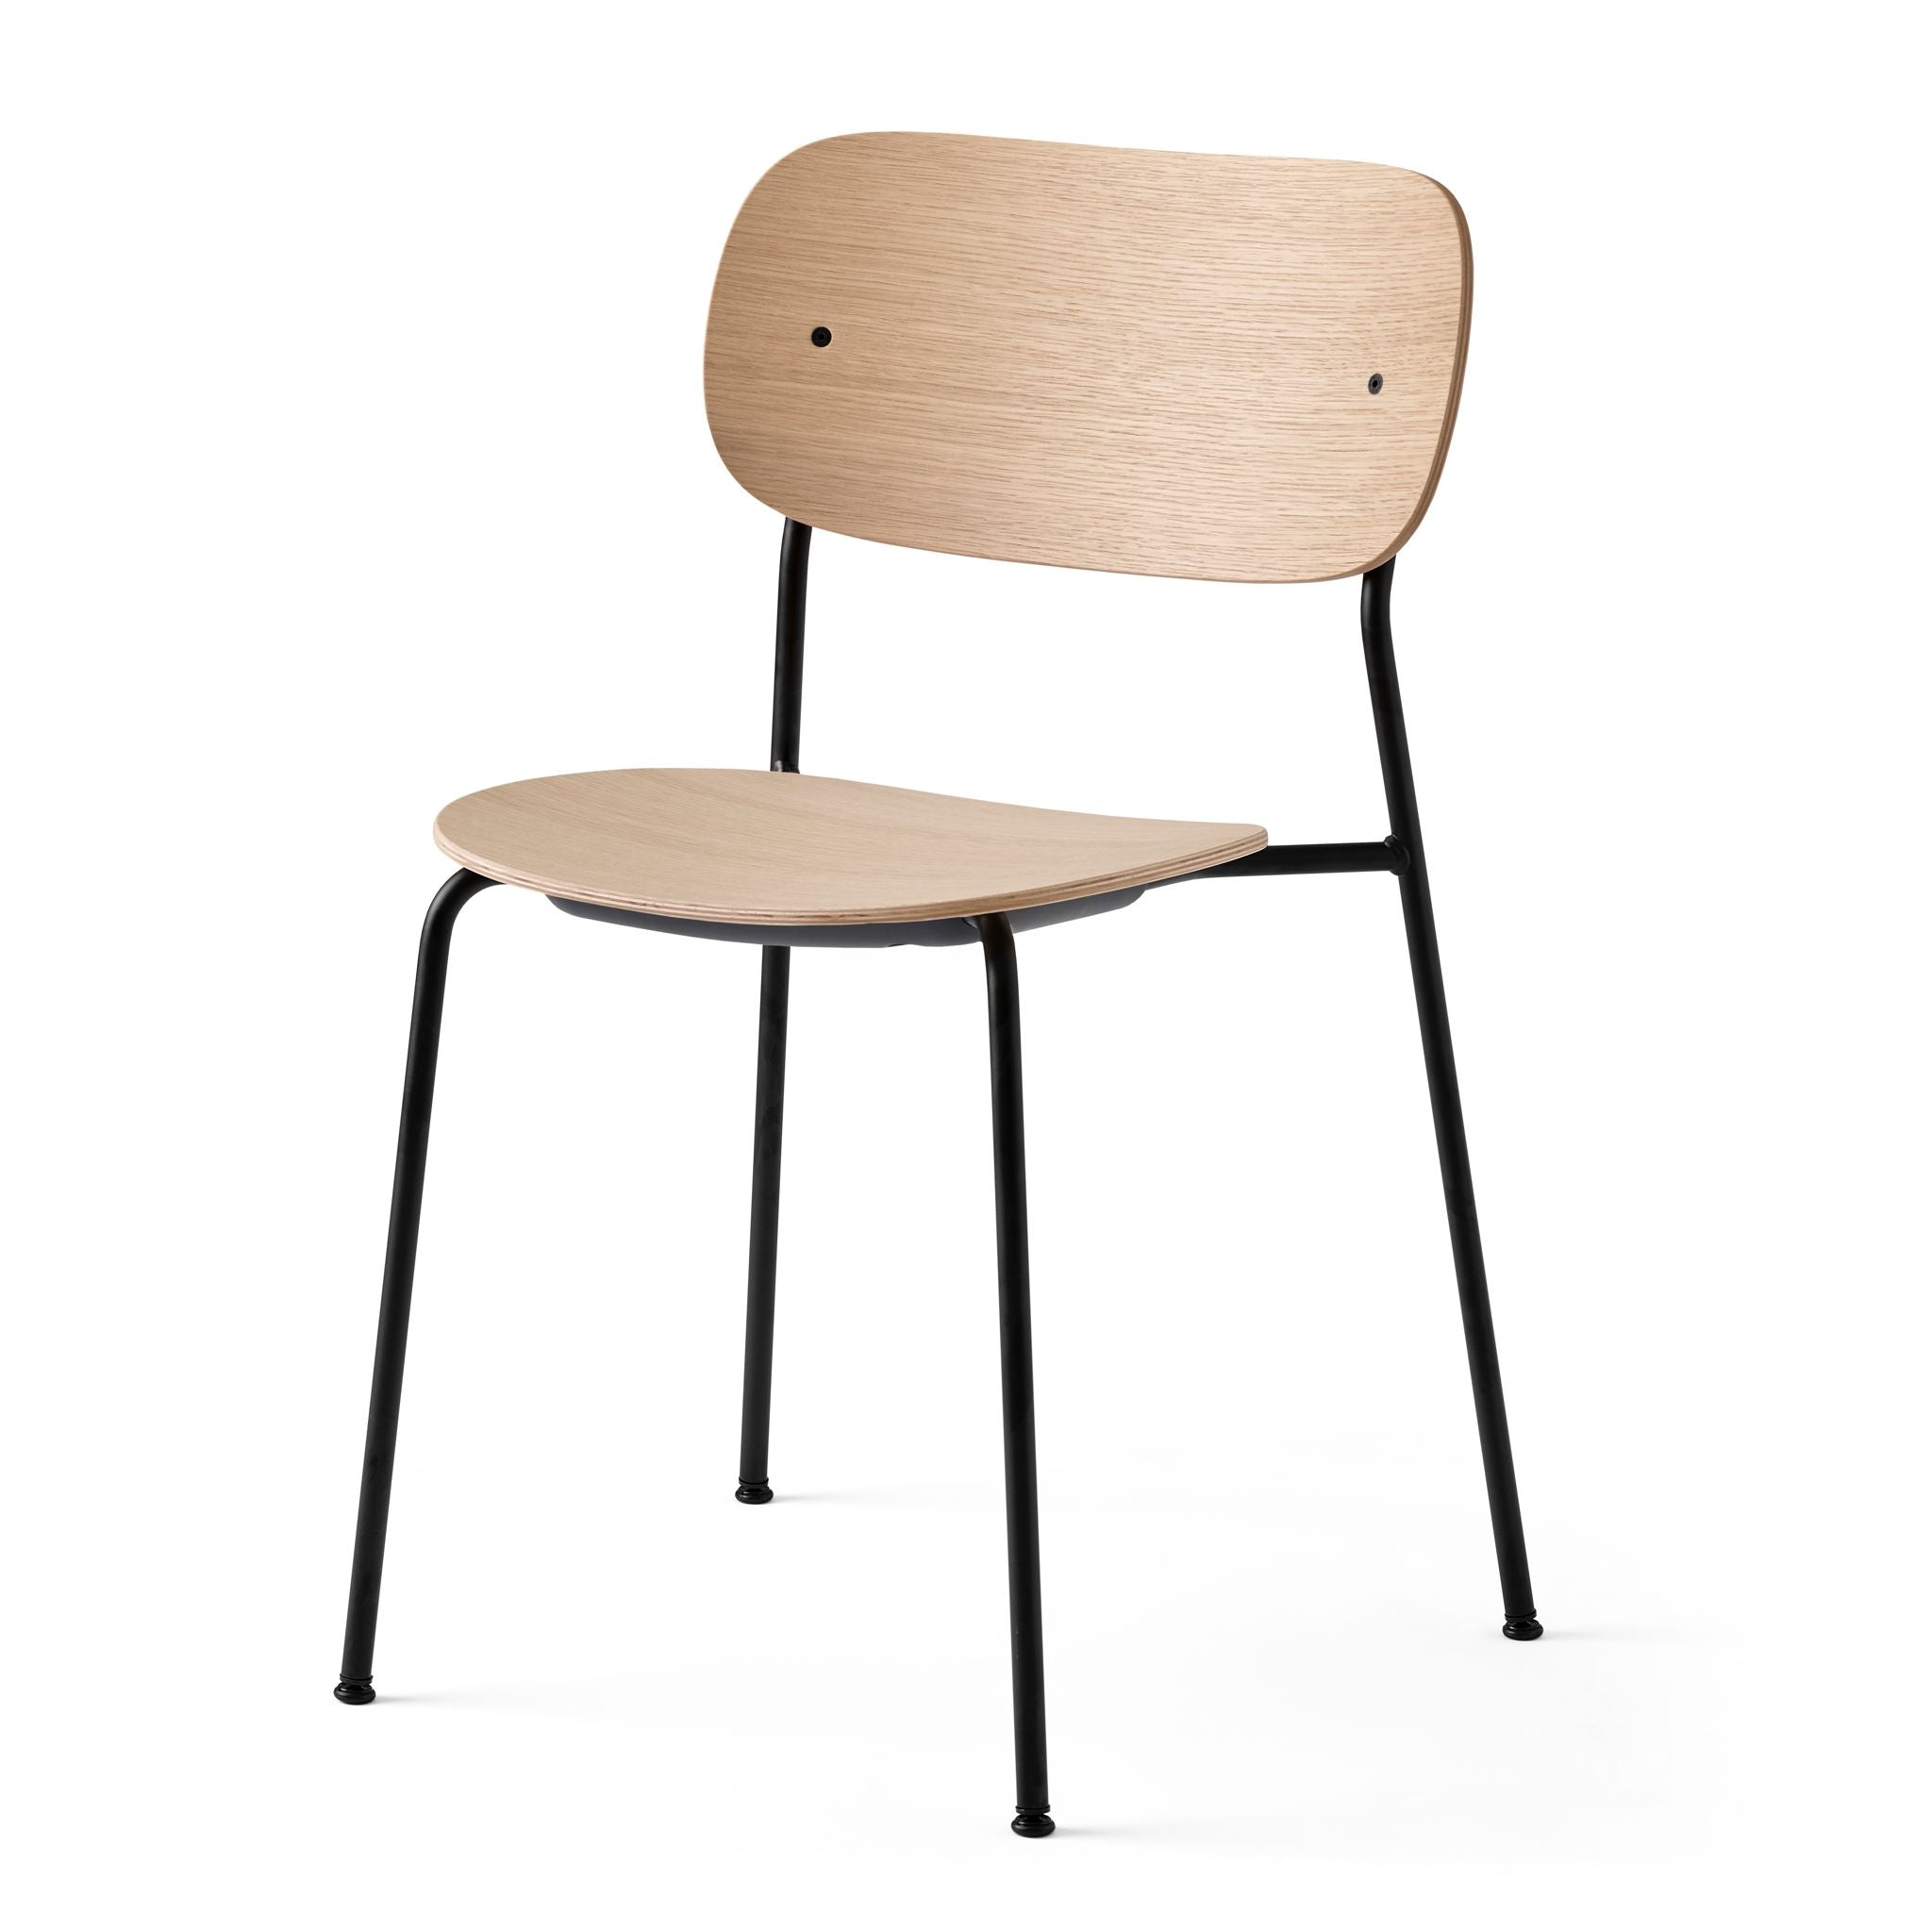 Co Chair, Un-Upholstered by Norm Architects & Els Van Hoorebeeck